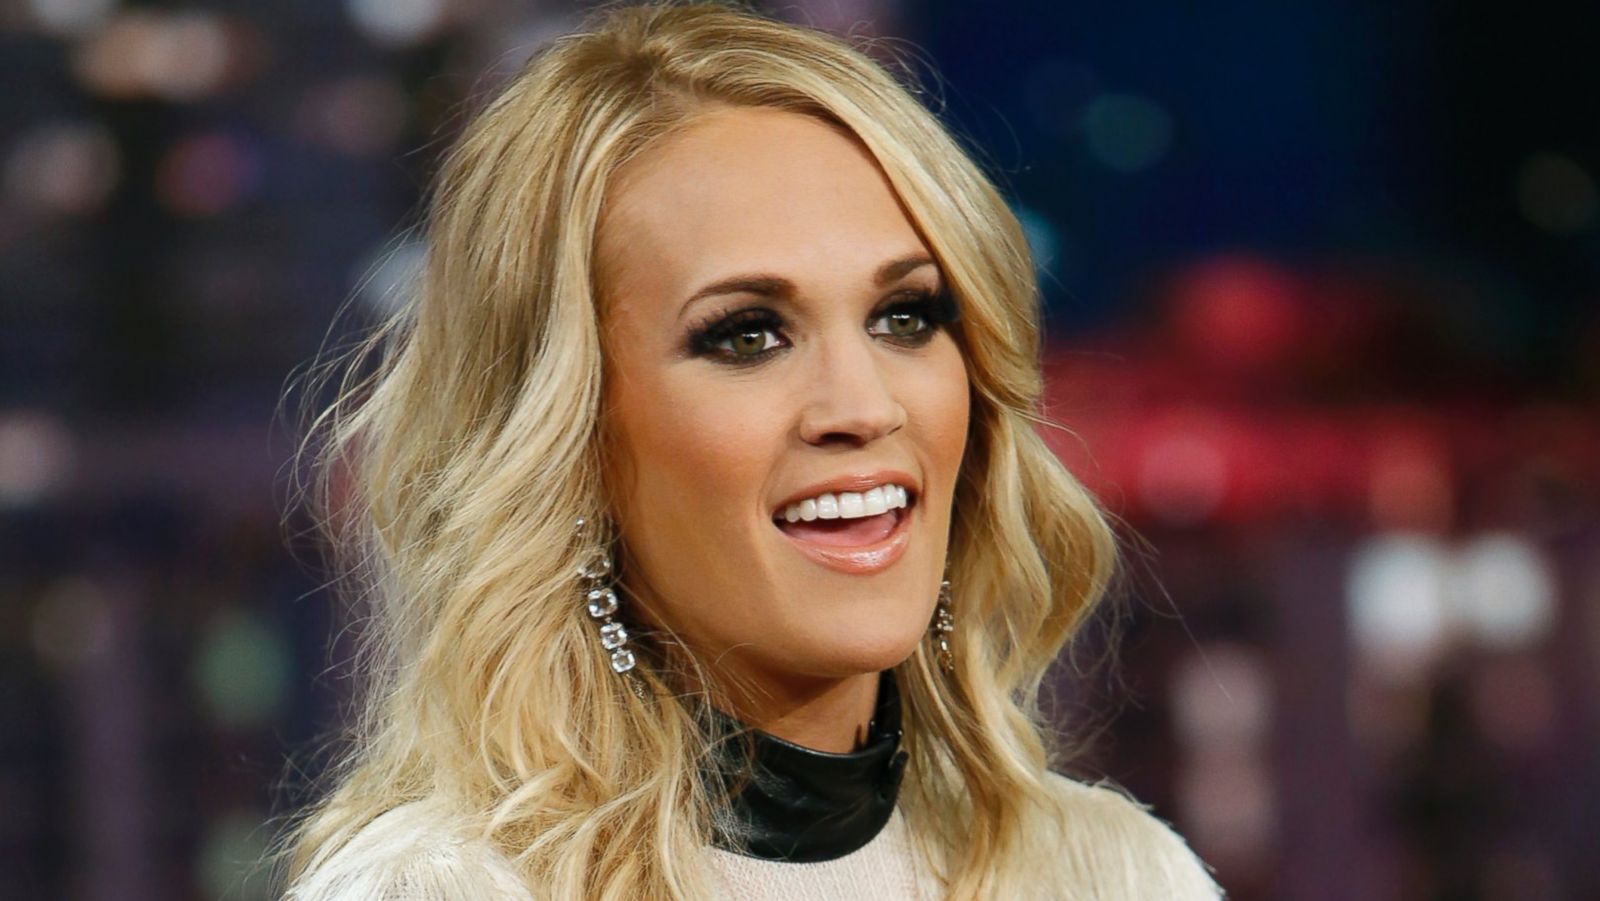 Go Country 105 - Carrie Underwood is honored to be nominated for